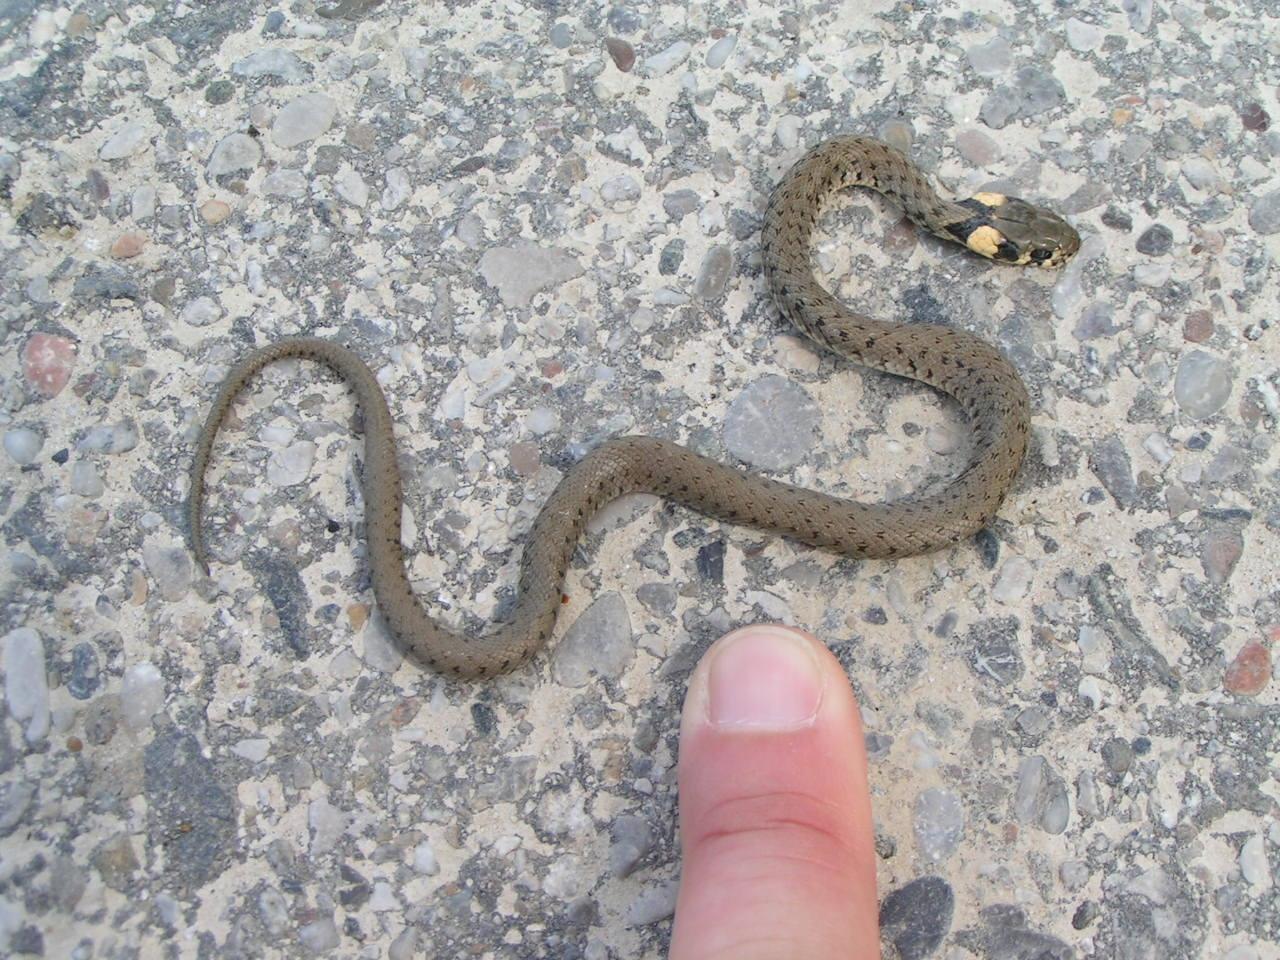 What Do Baby Grass Snakes Eat